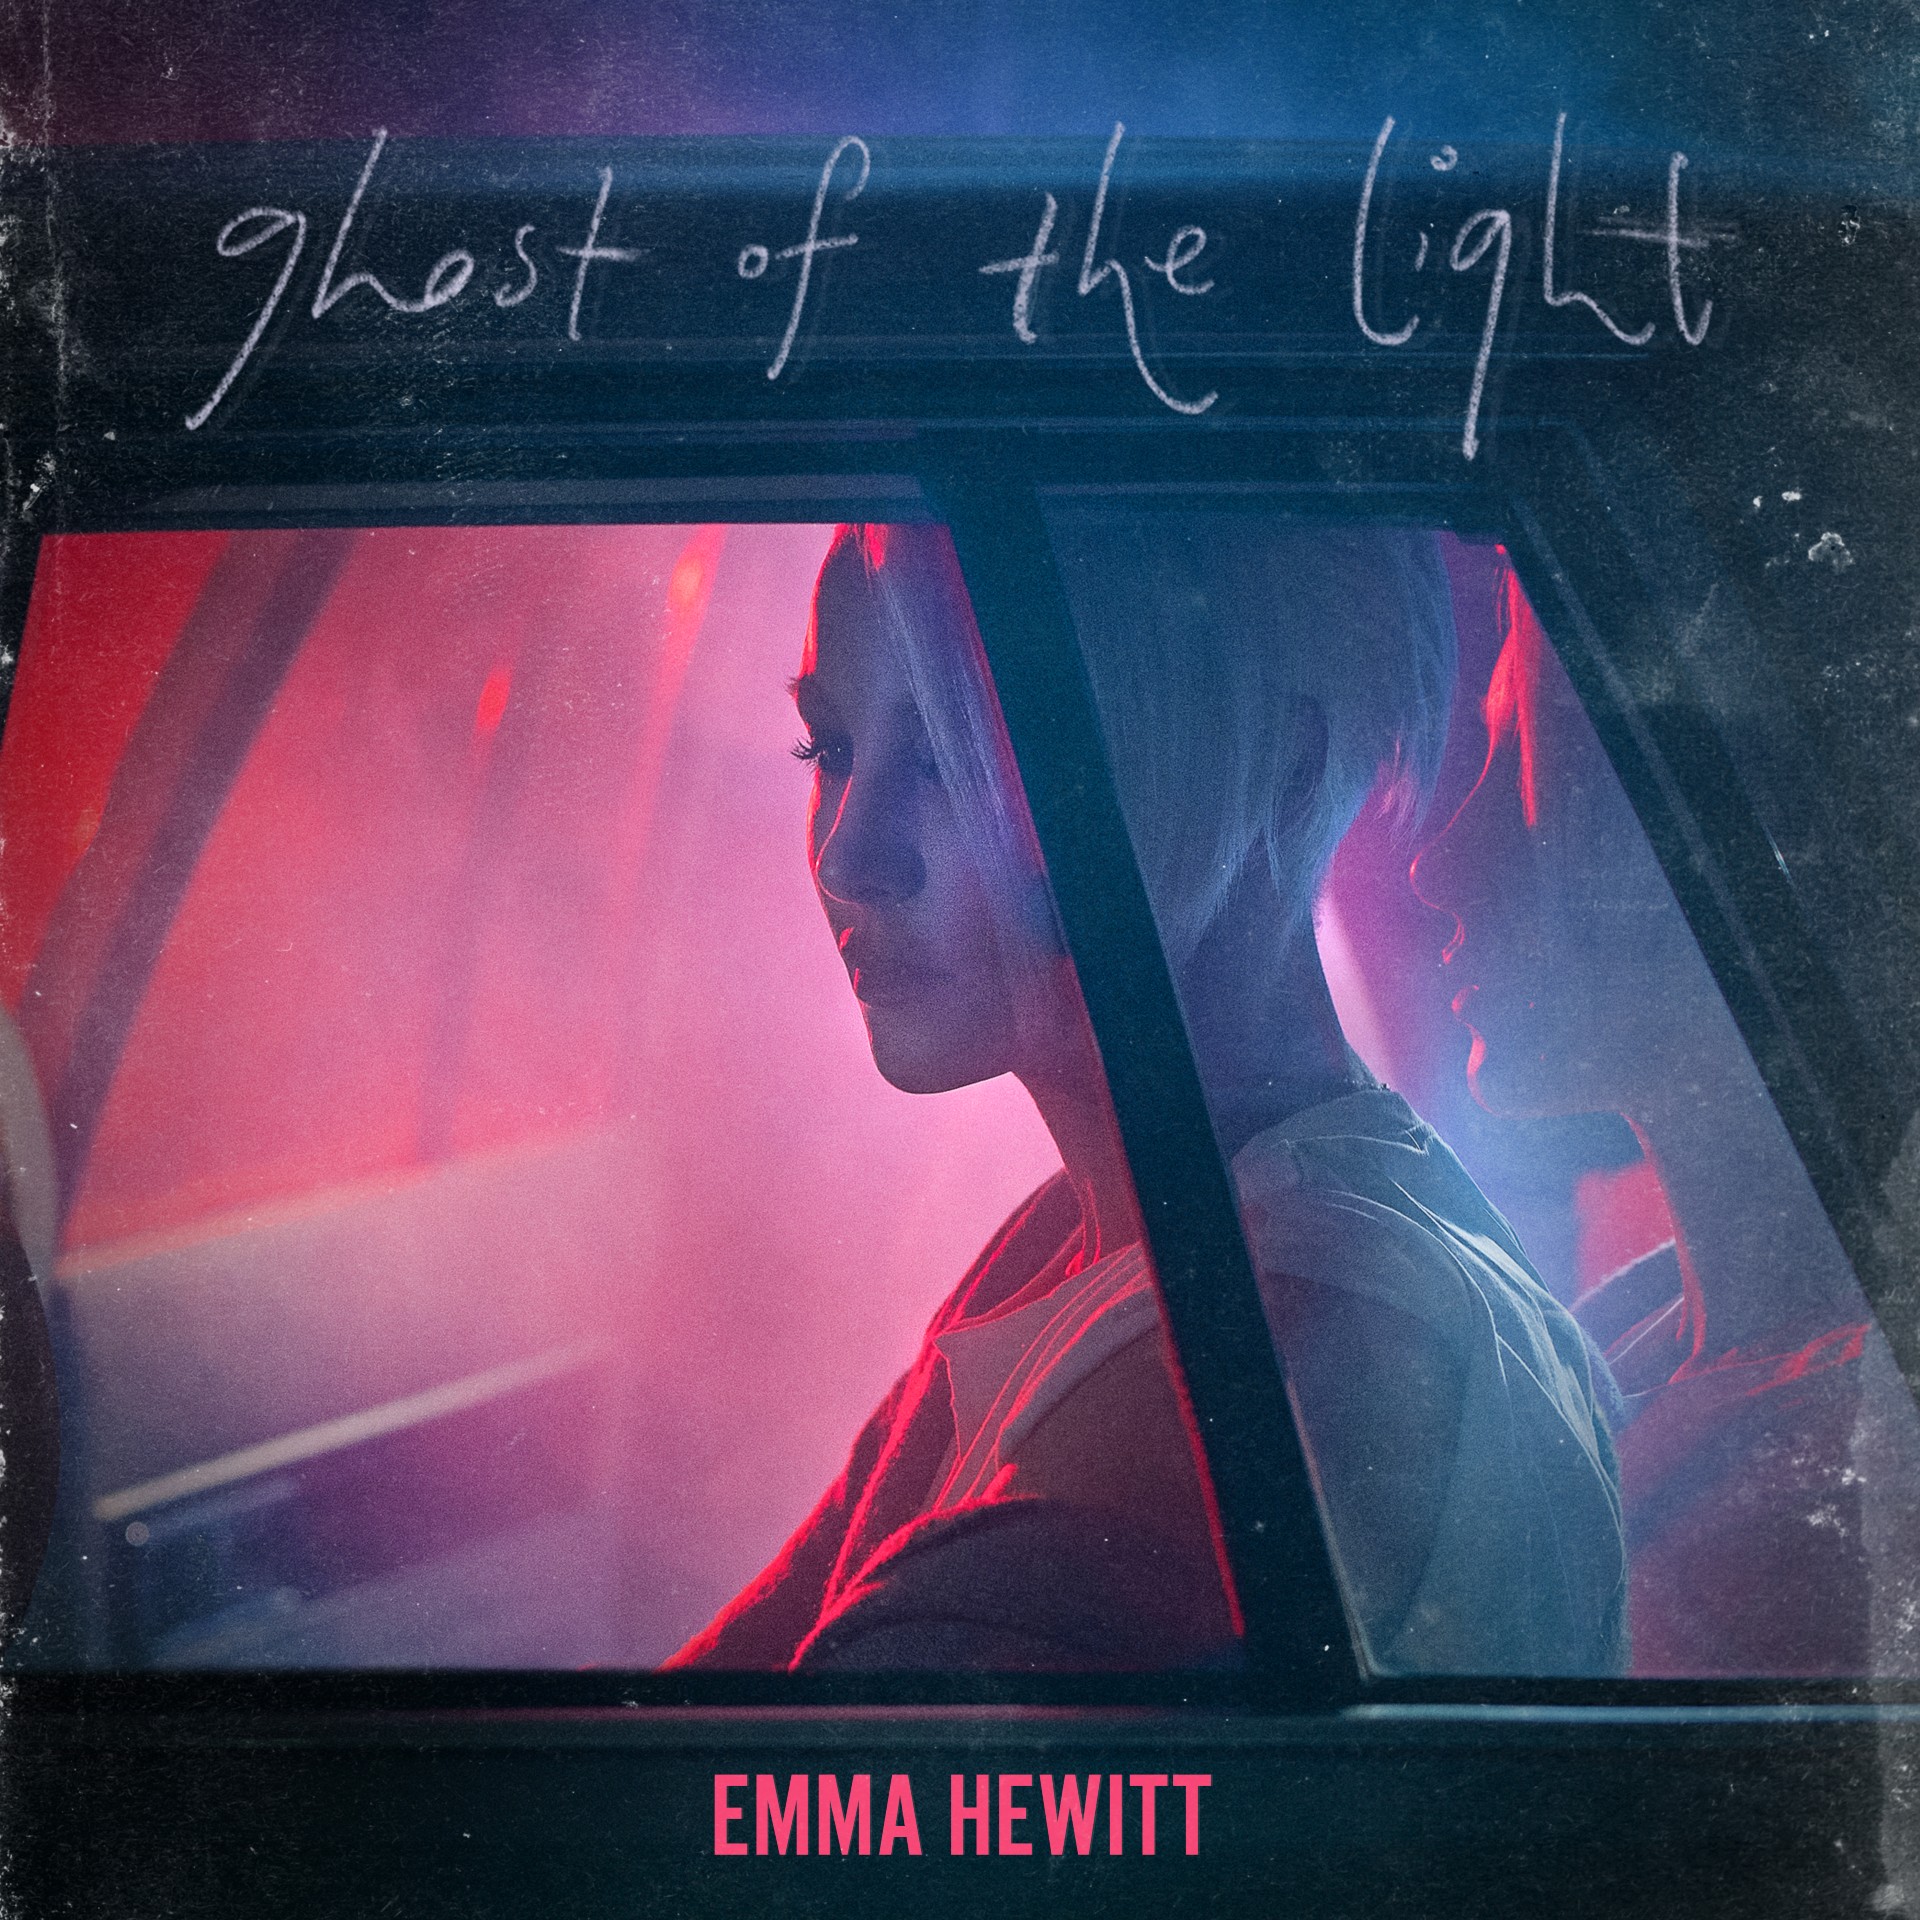 Emma Hewitt presents Ghost Of The Light on Black Hole Recordings